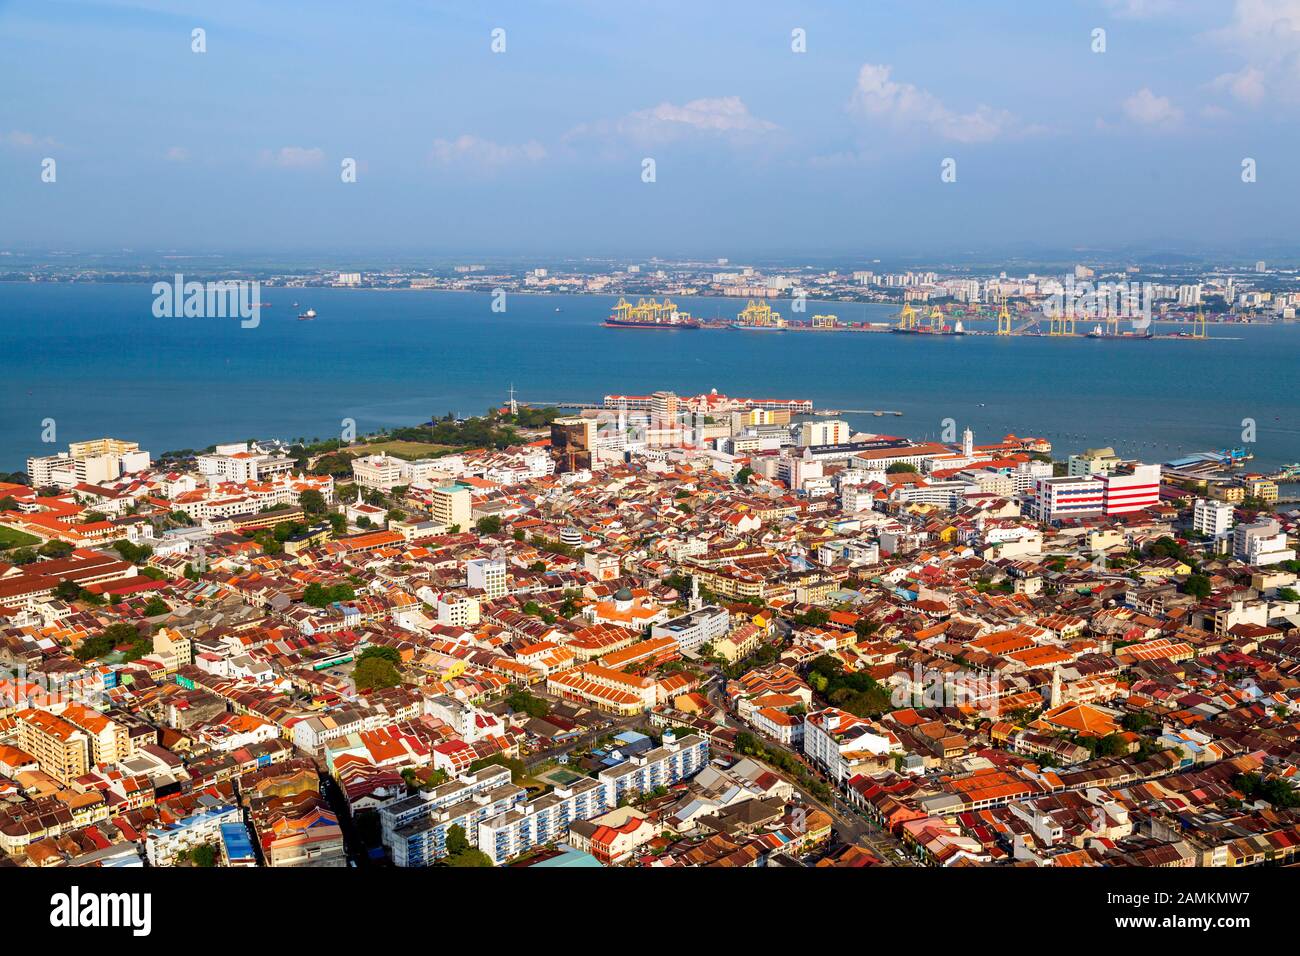 Aerial view of the city of Georgetown from the top of the Komtar Tower in Georgetown, Penang Island, Malaysia looking towards Butterworth and the Stra Stock Photo